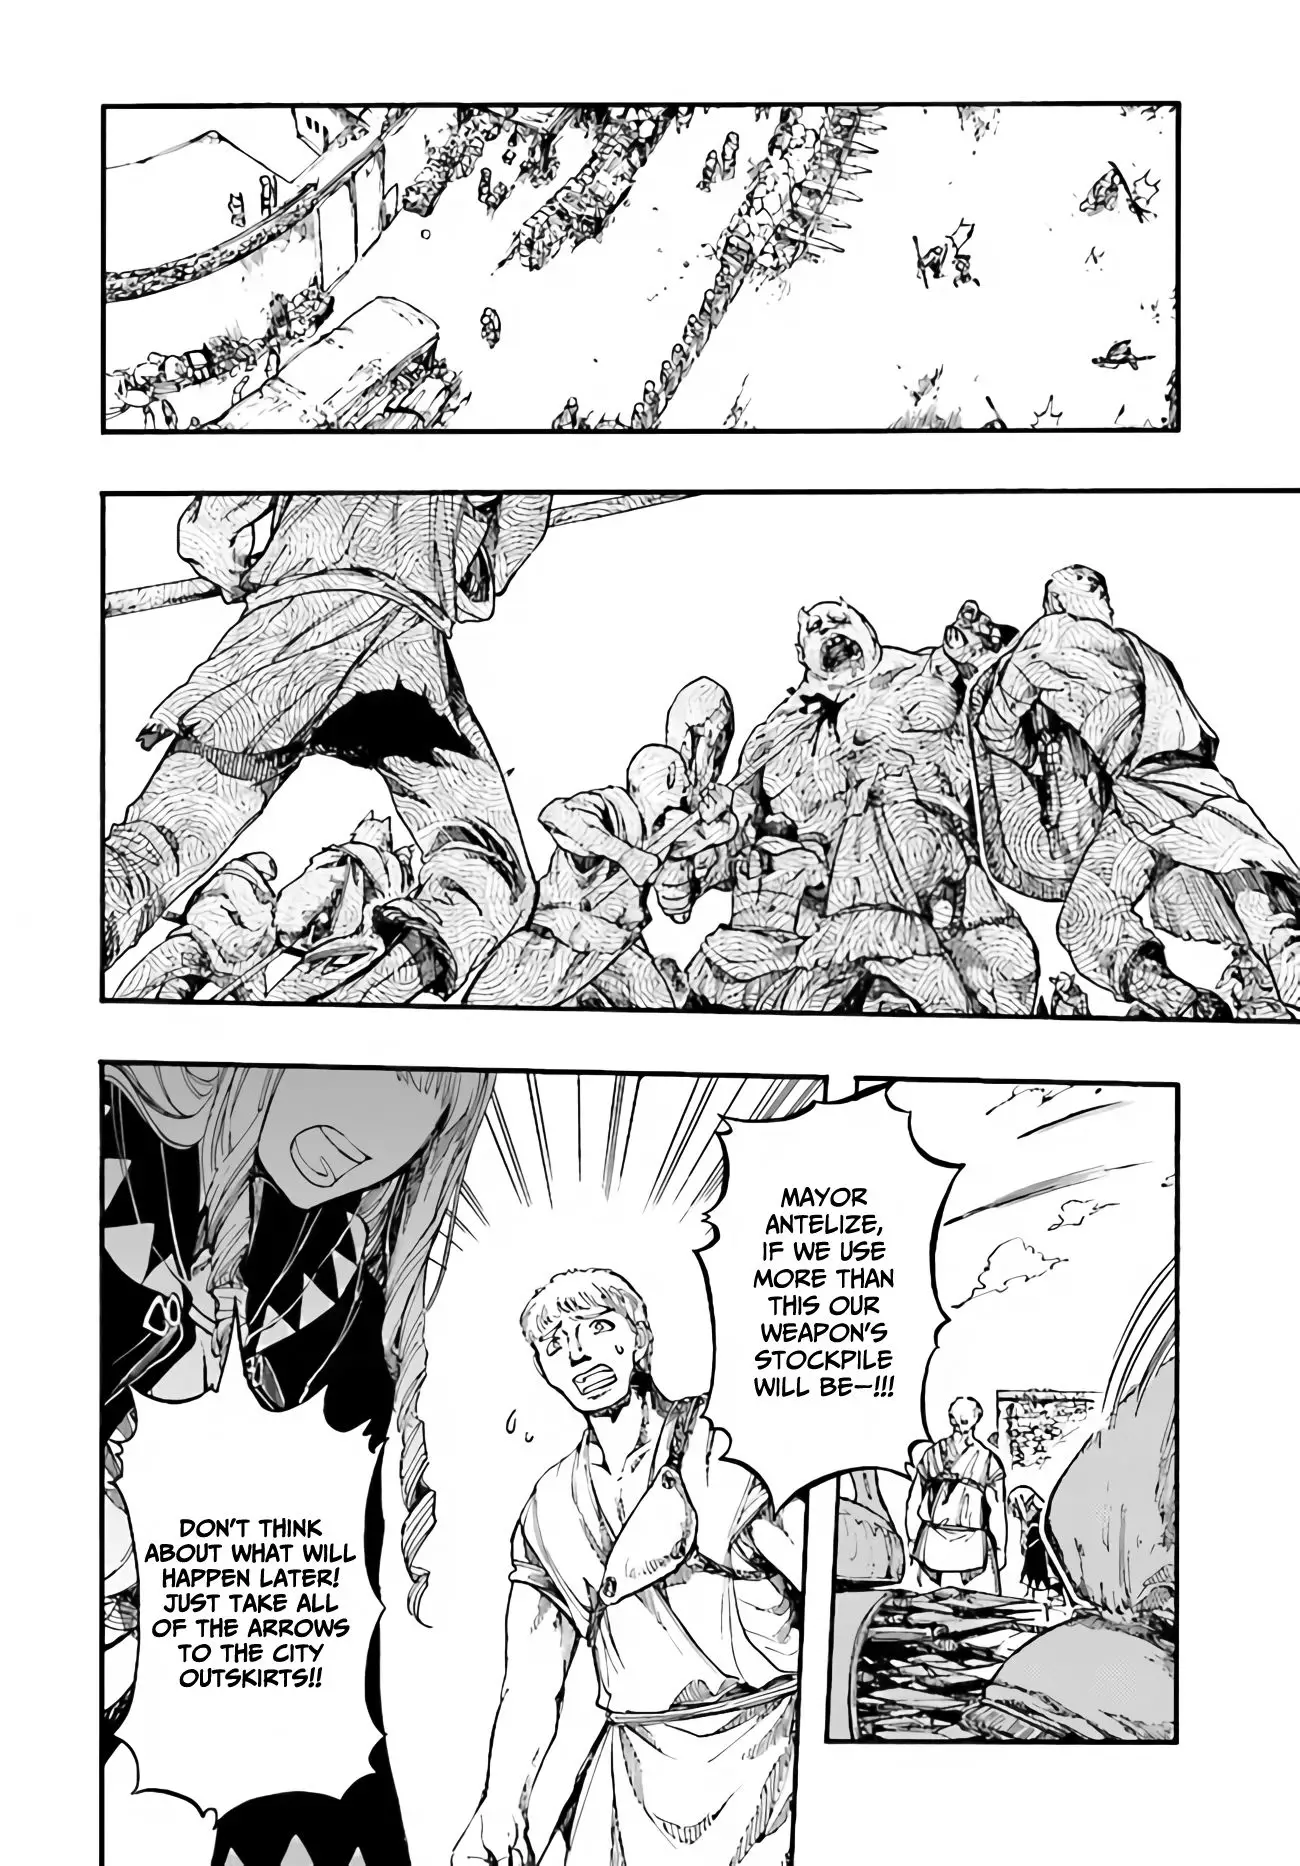 Isekai Apocalypse Mynoghra ~The Conquest Of The World Starts With The Civilization Of Ruin~ - 16.2 page 2-0372e96d